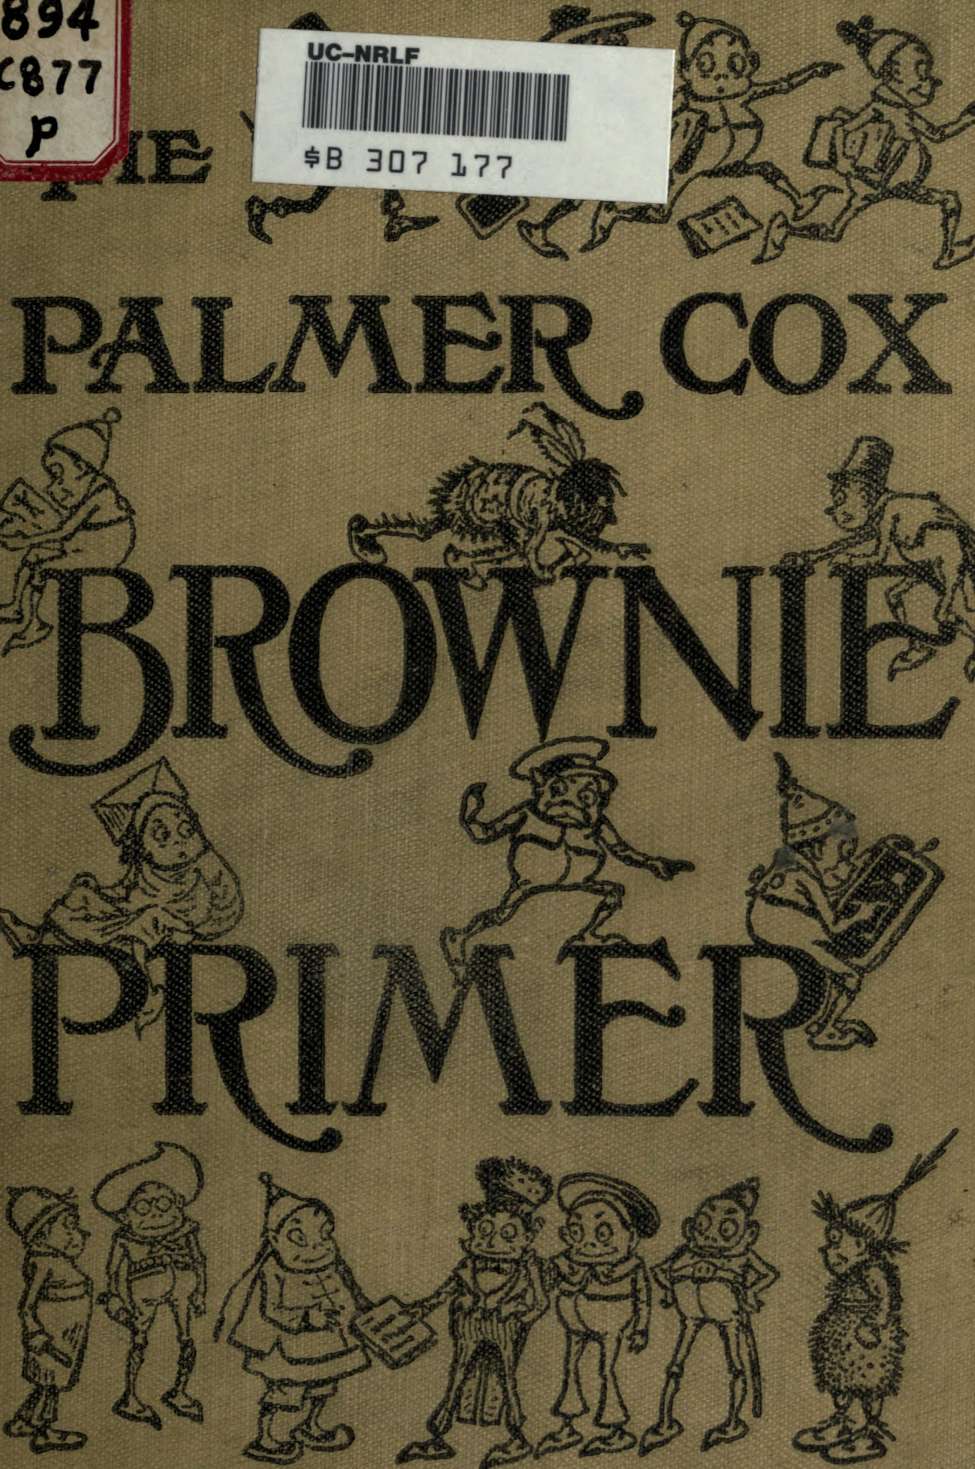 Book Cover For Brownie Primer - Palmer Cox